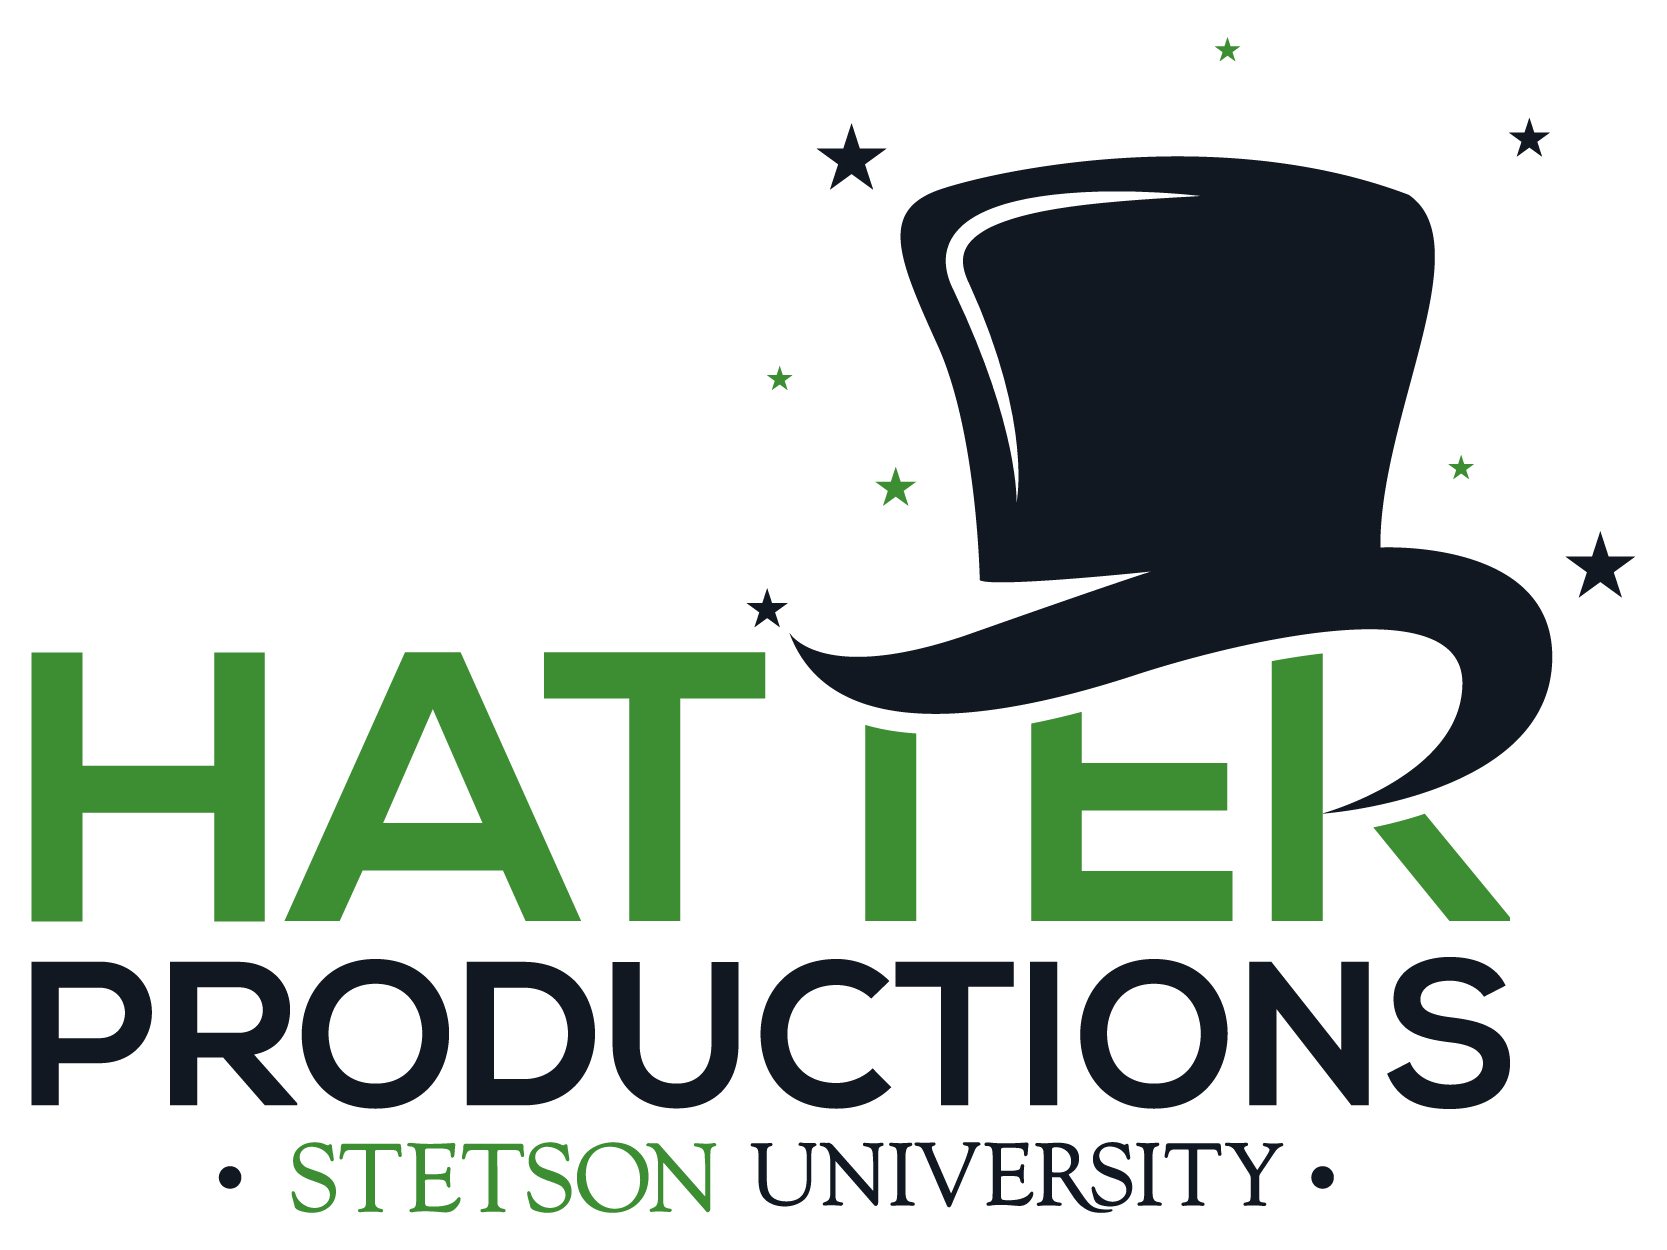 Graphic logo for HATTER PRODUCTIONS featuring bold letters, a stylized green hat and stars